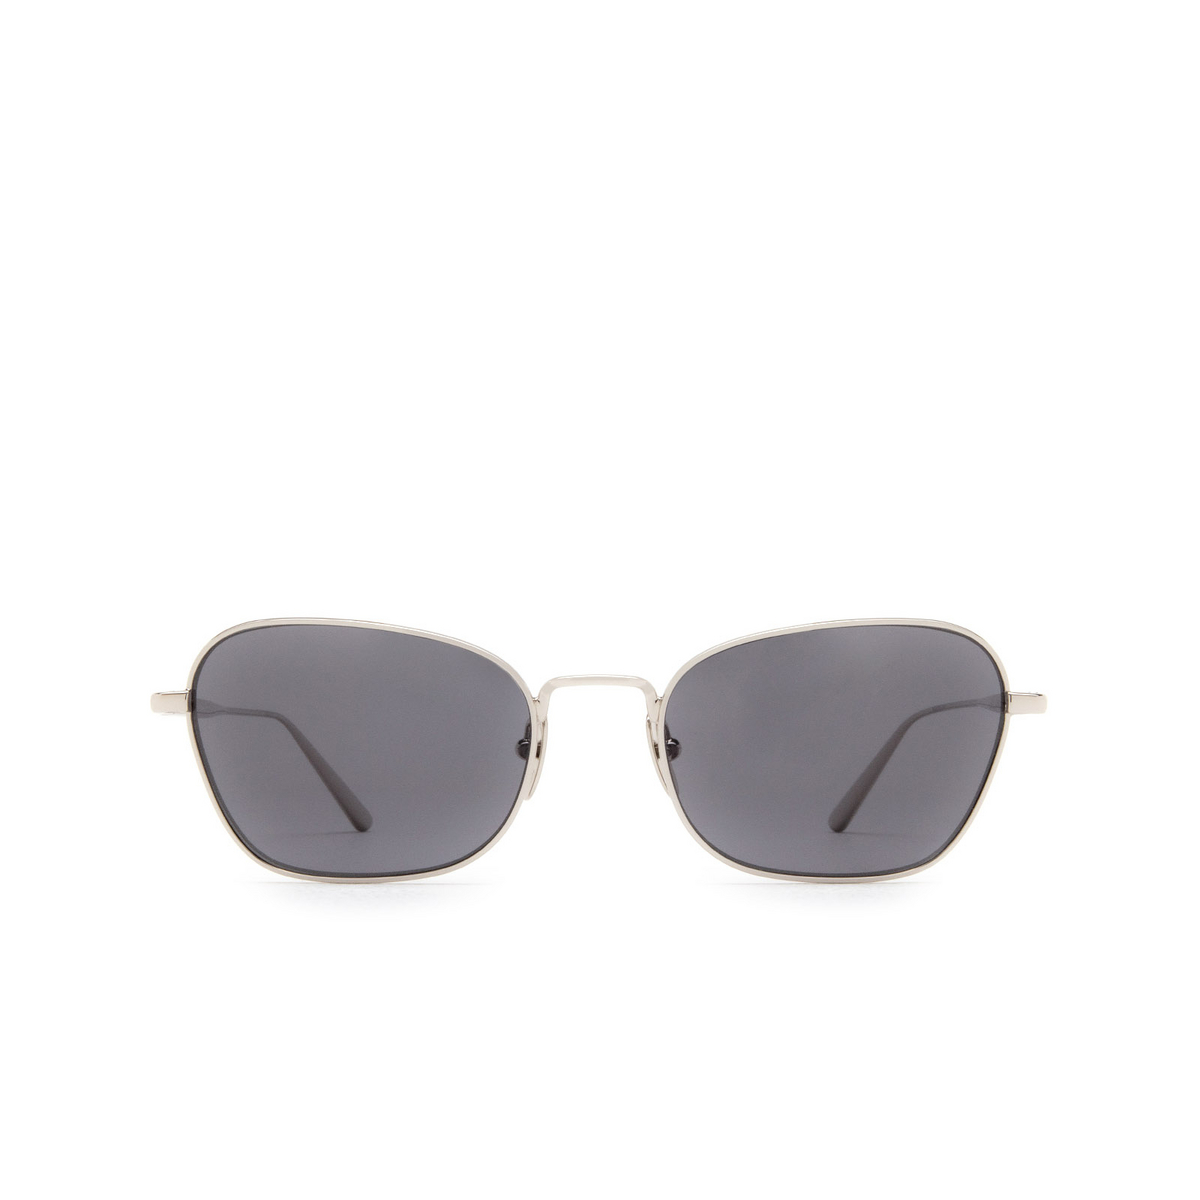 Chimi LYNX Sunglasses GREY - front view